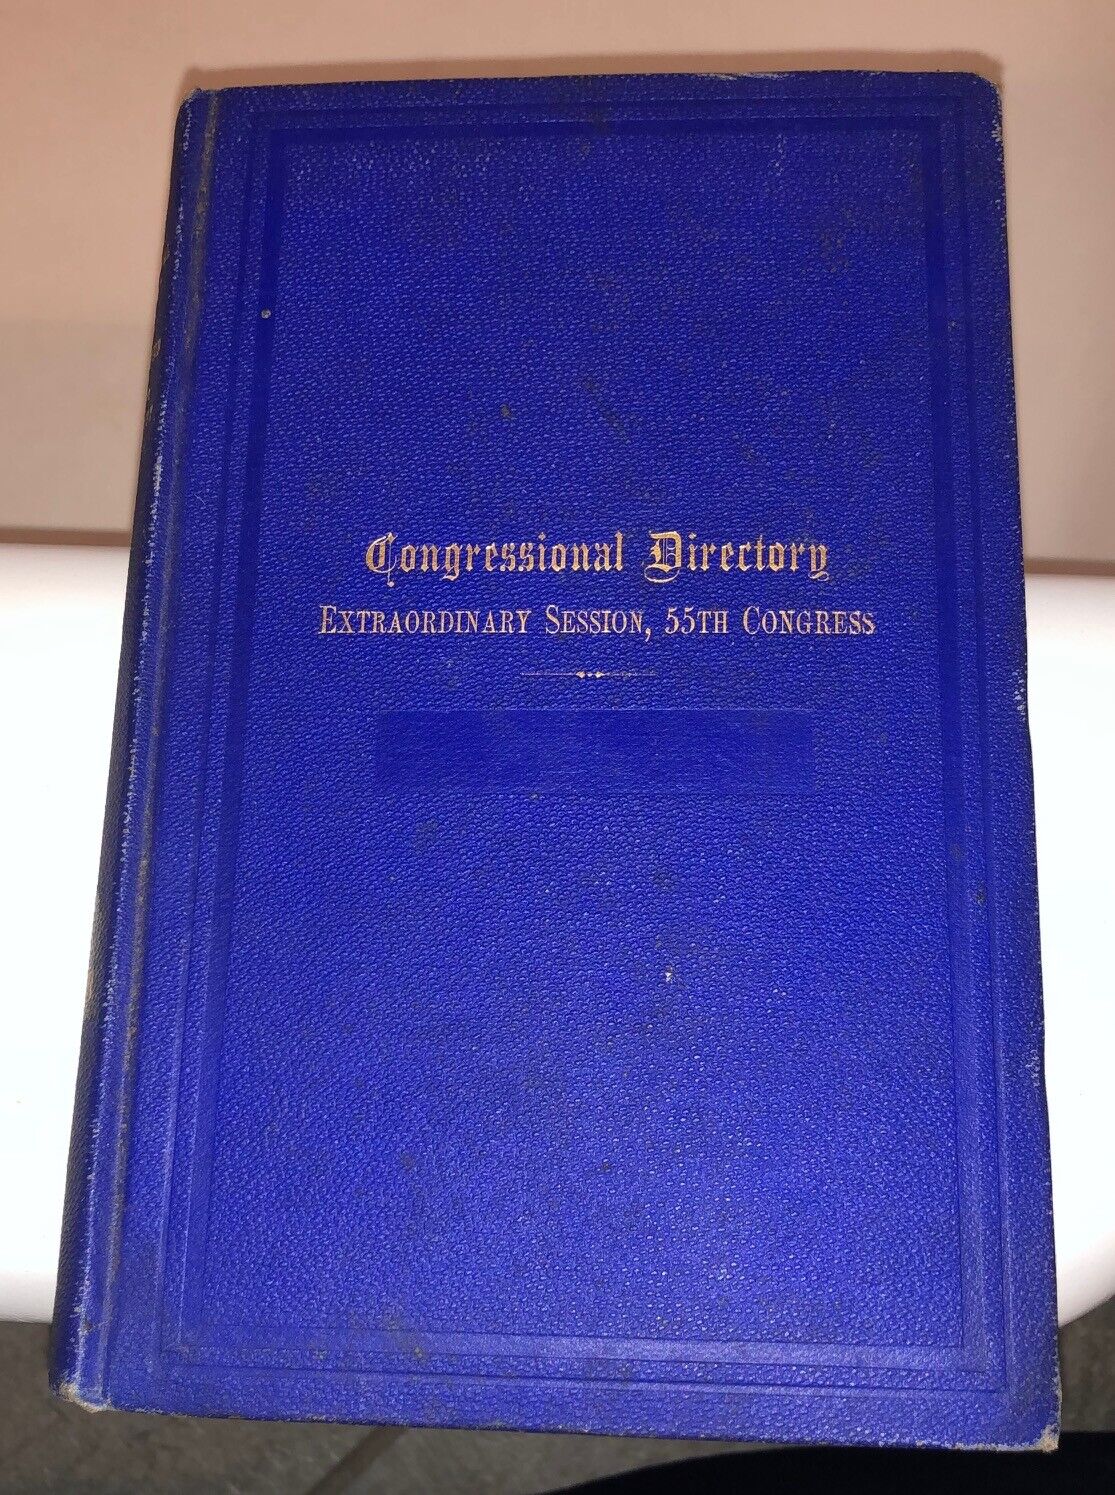 1897 Congressional Directory 55th Congress - Wyoming Historical Society #3311